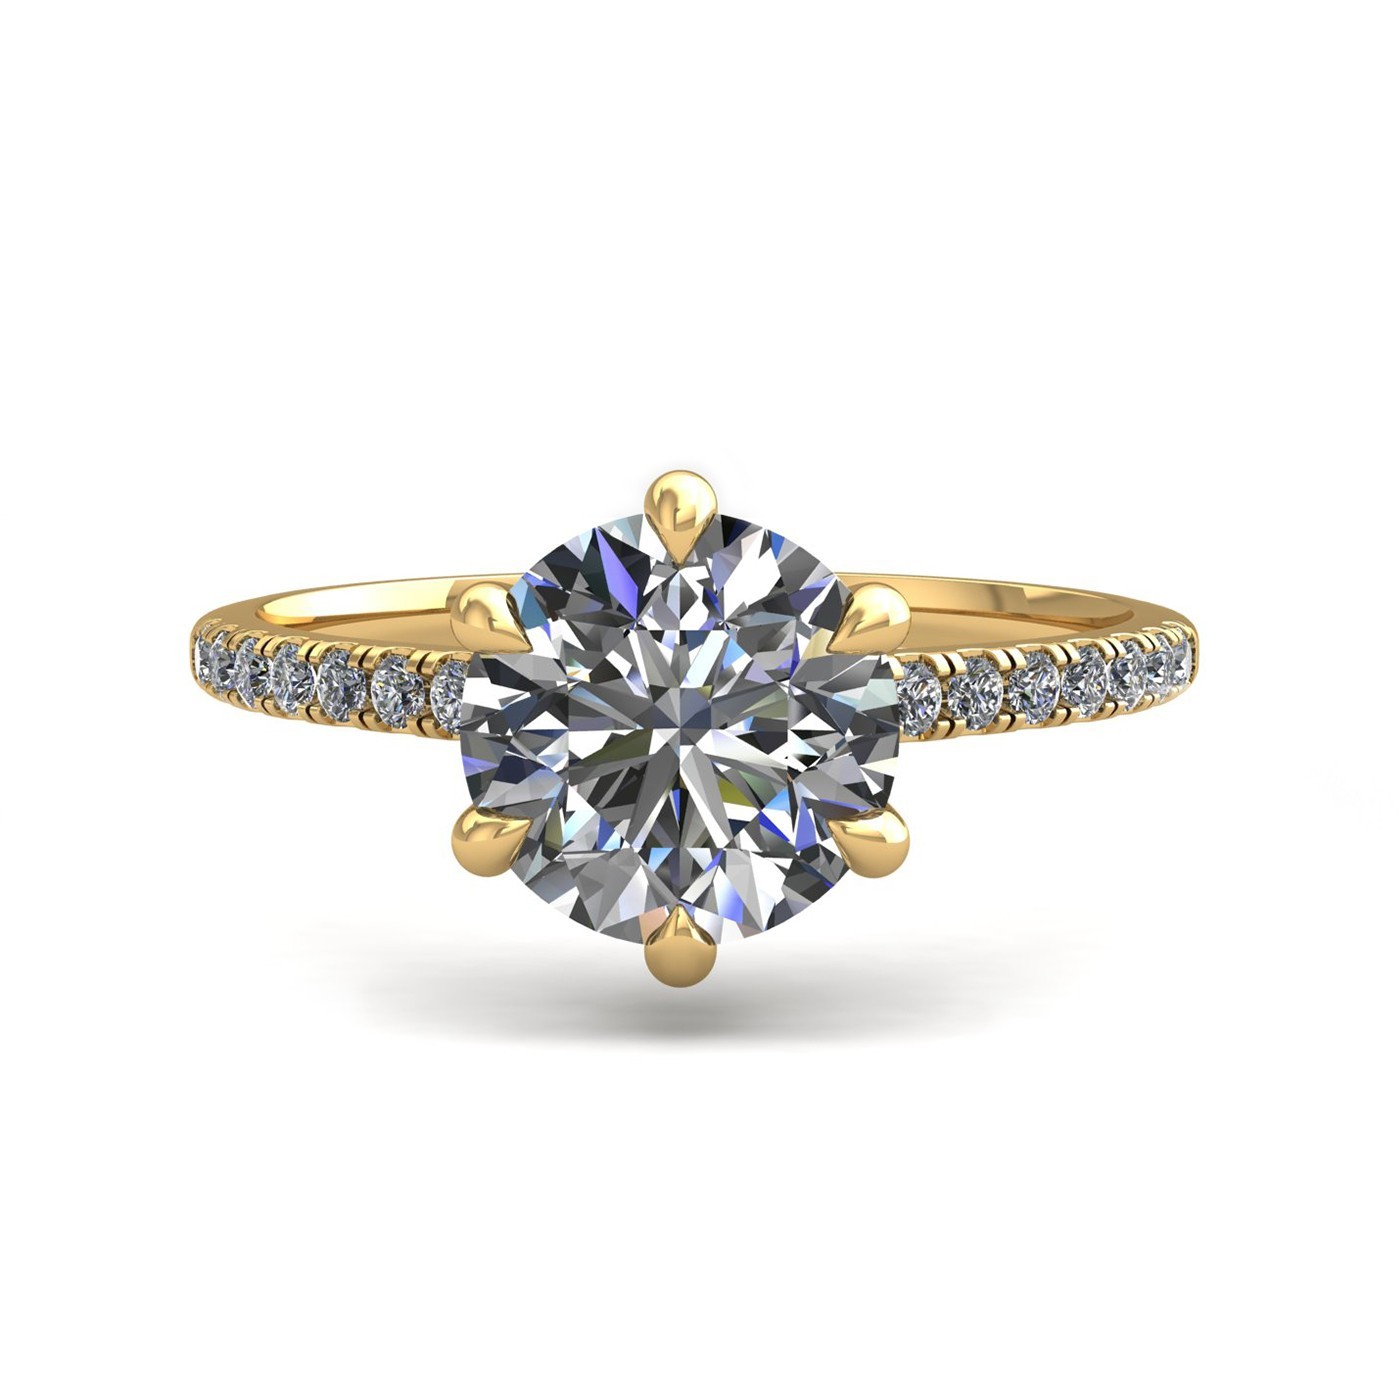 18k yellow gold 0,80 ct 6 prongs round cut diamond engagement ring with whisper thin pavÉ set band Photos & images